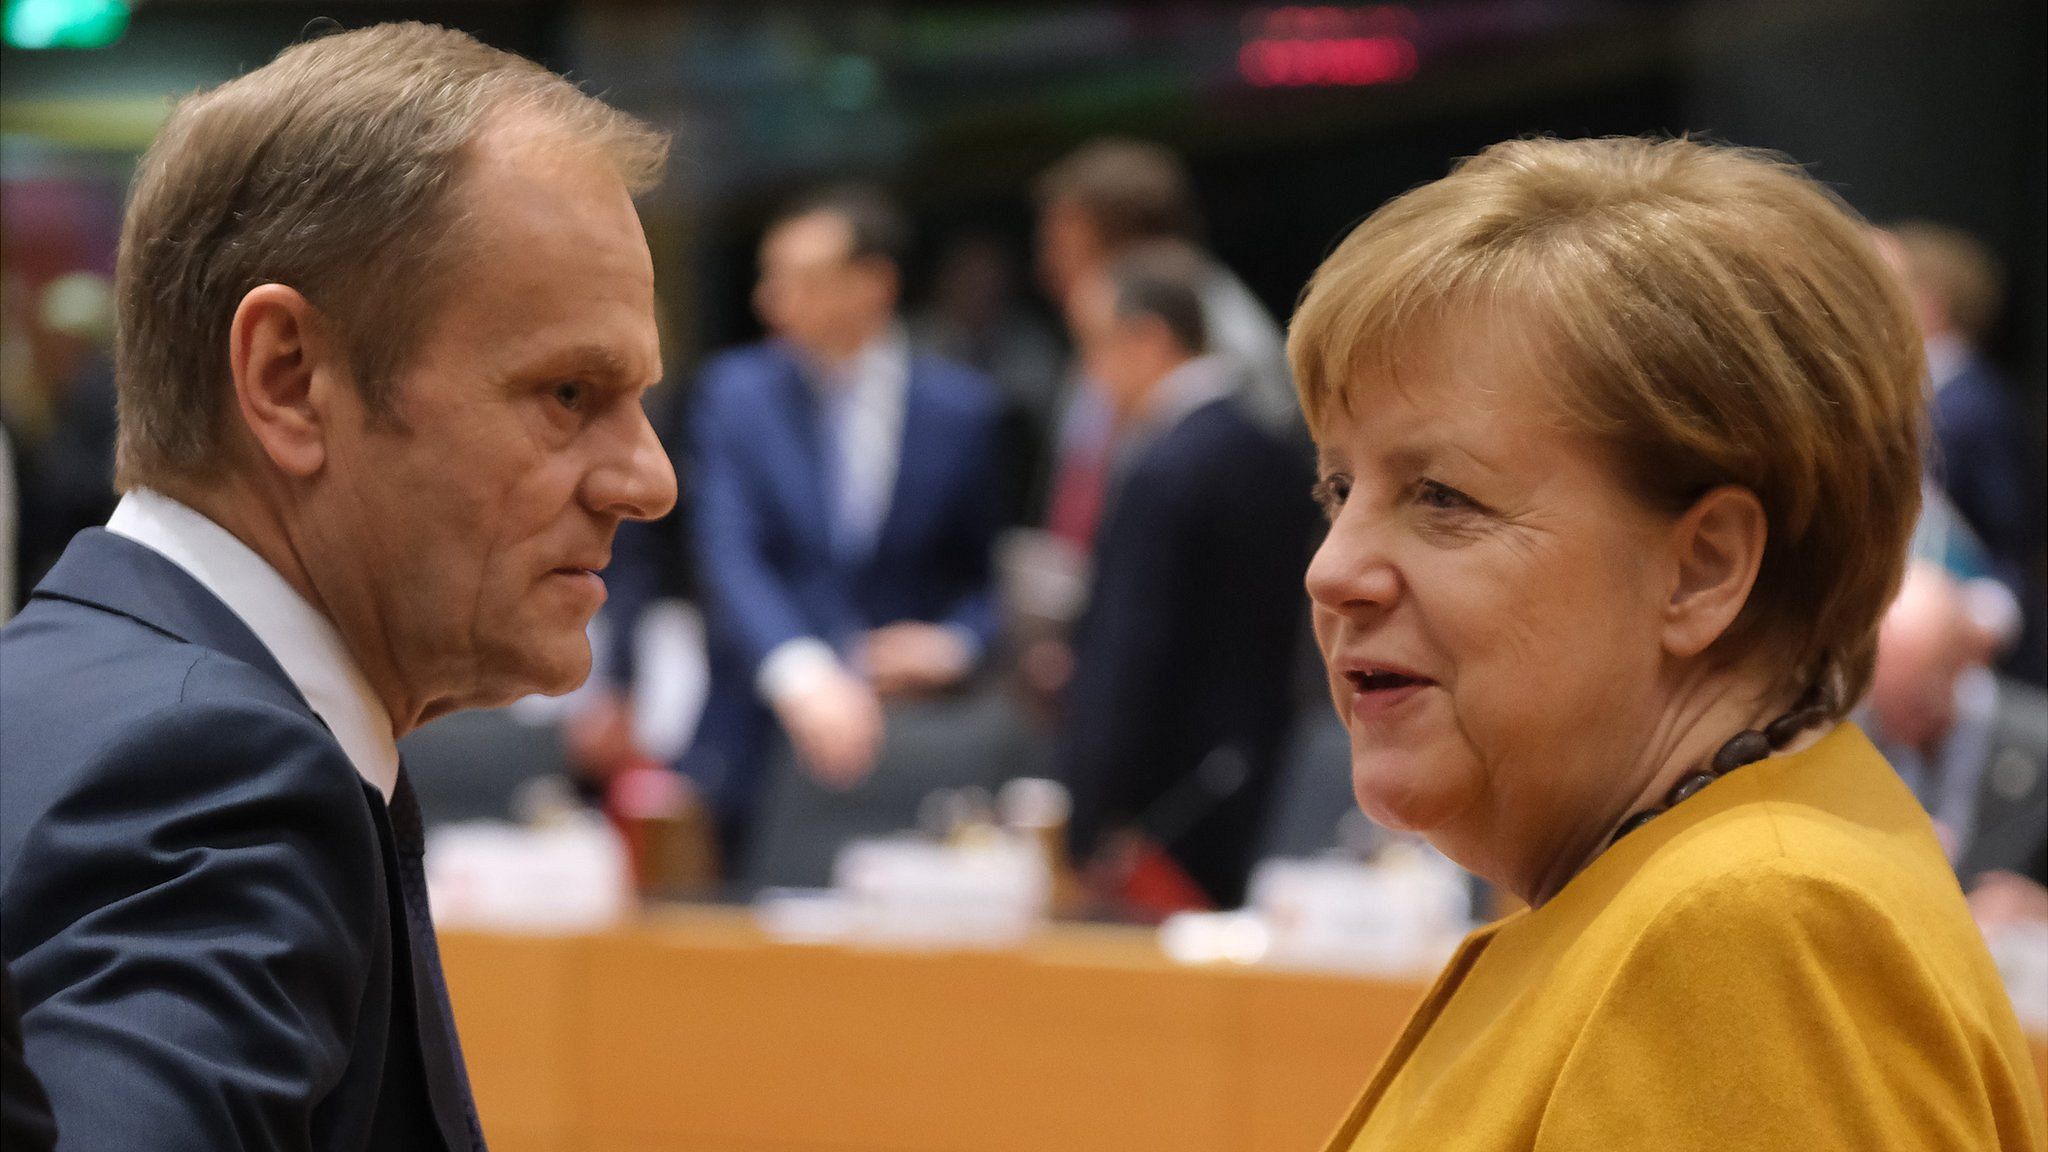 German Chancellor Angela Merkel speaks with European Council President Donald Tusk on the second day of an EU summit on March 22,